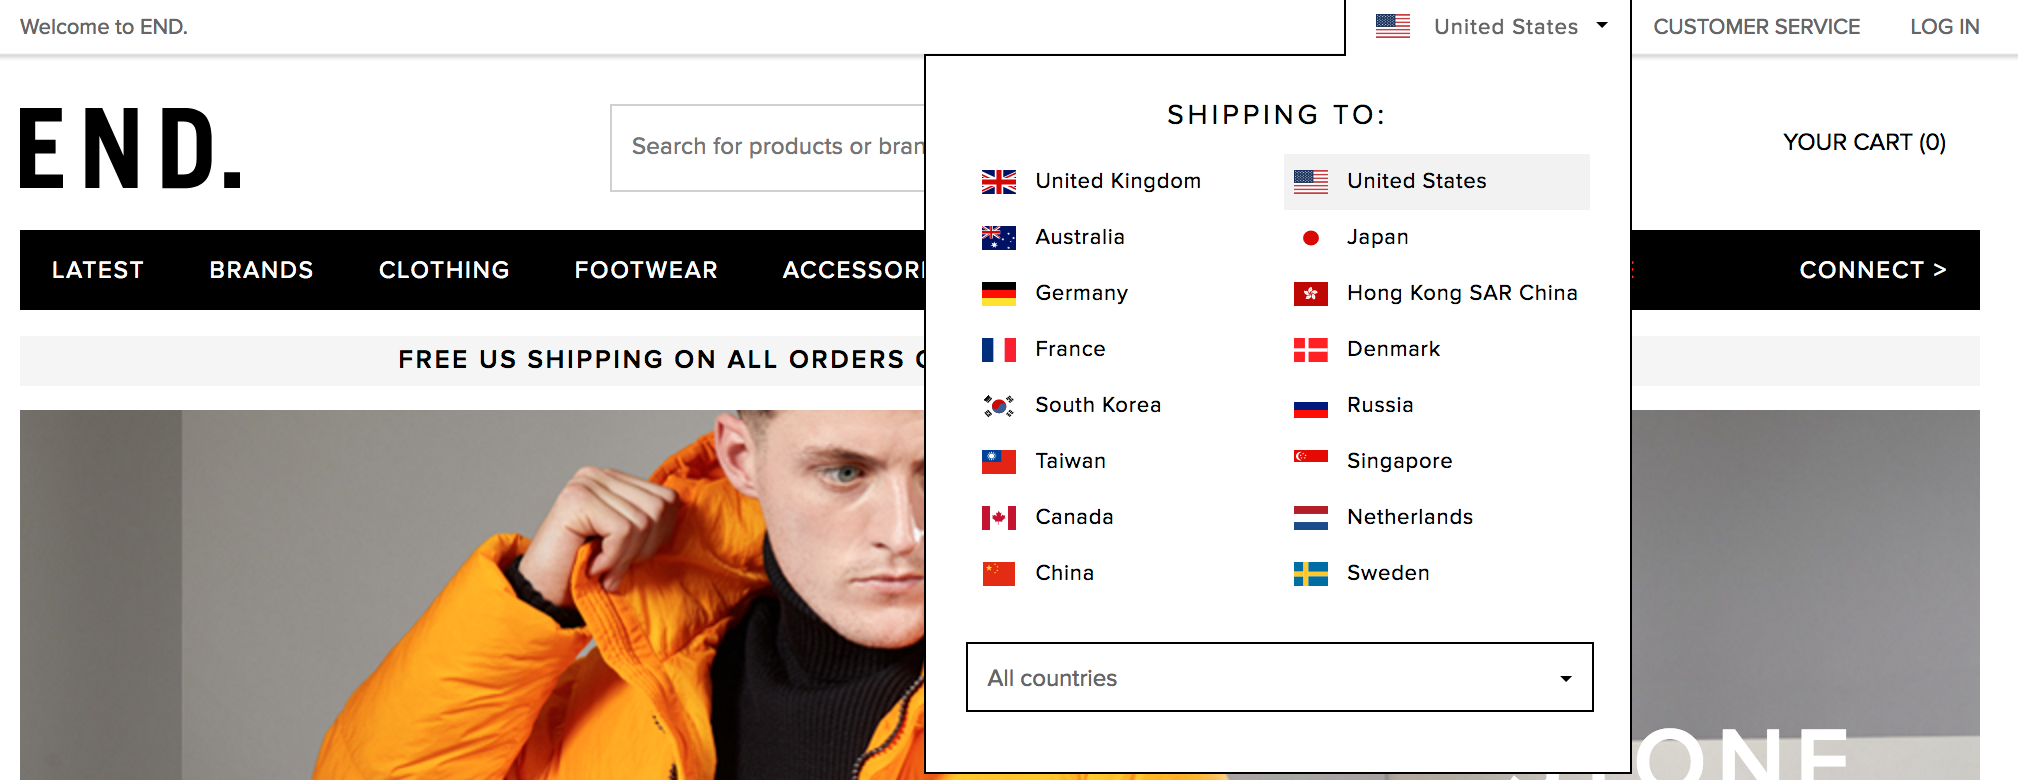 An example of a webstore that offers differing versions of its website depending on the country it is shipping to